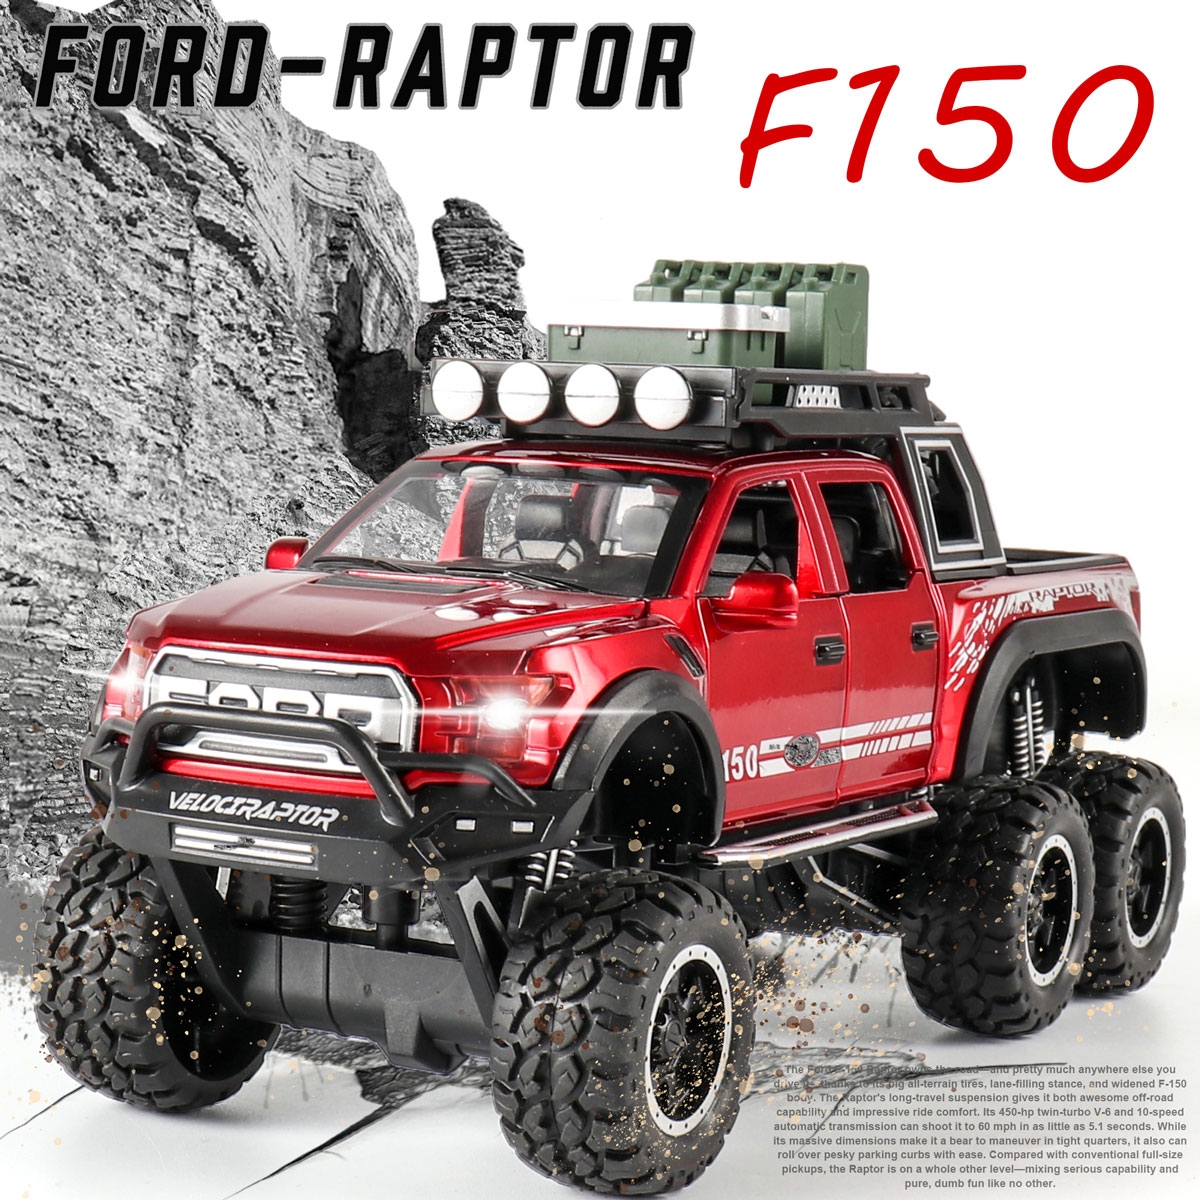 1:28 Alloy Foro-Raptor F150 Pull Back Motor 4 Door Open Diecast Model Car Toys with Sound Light for Collection Gift